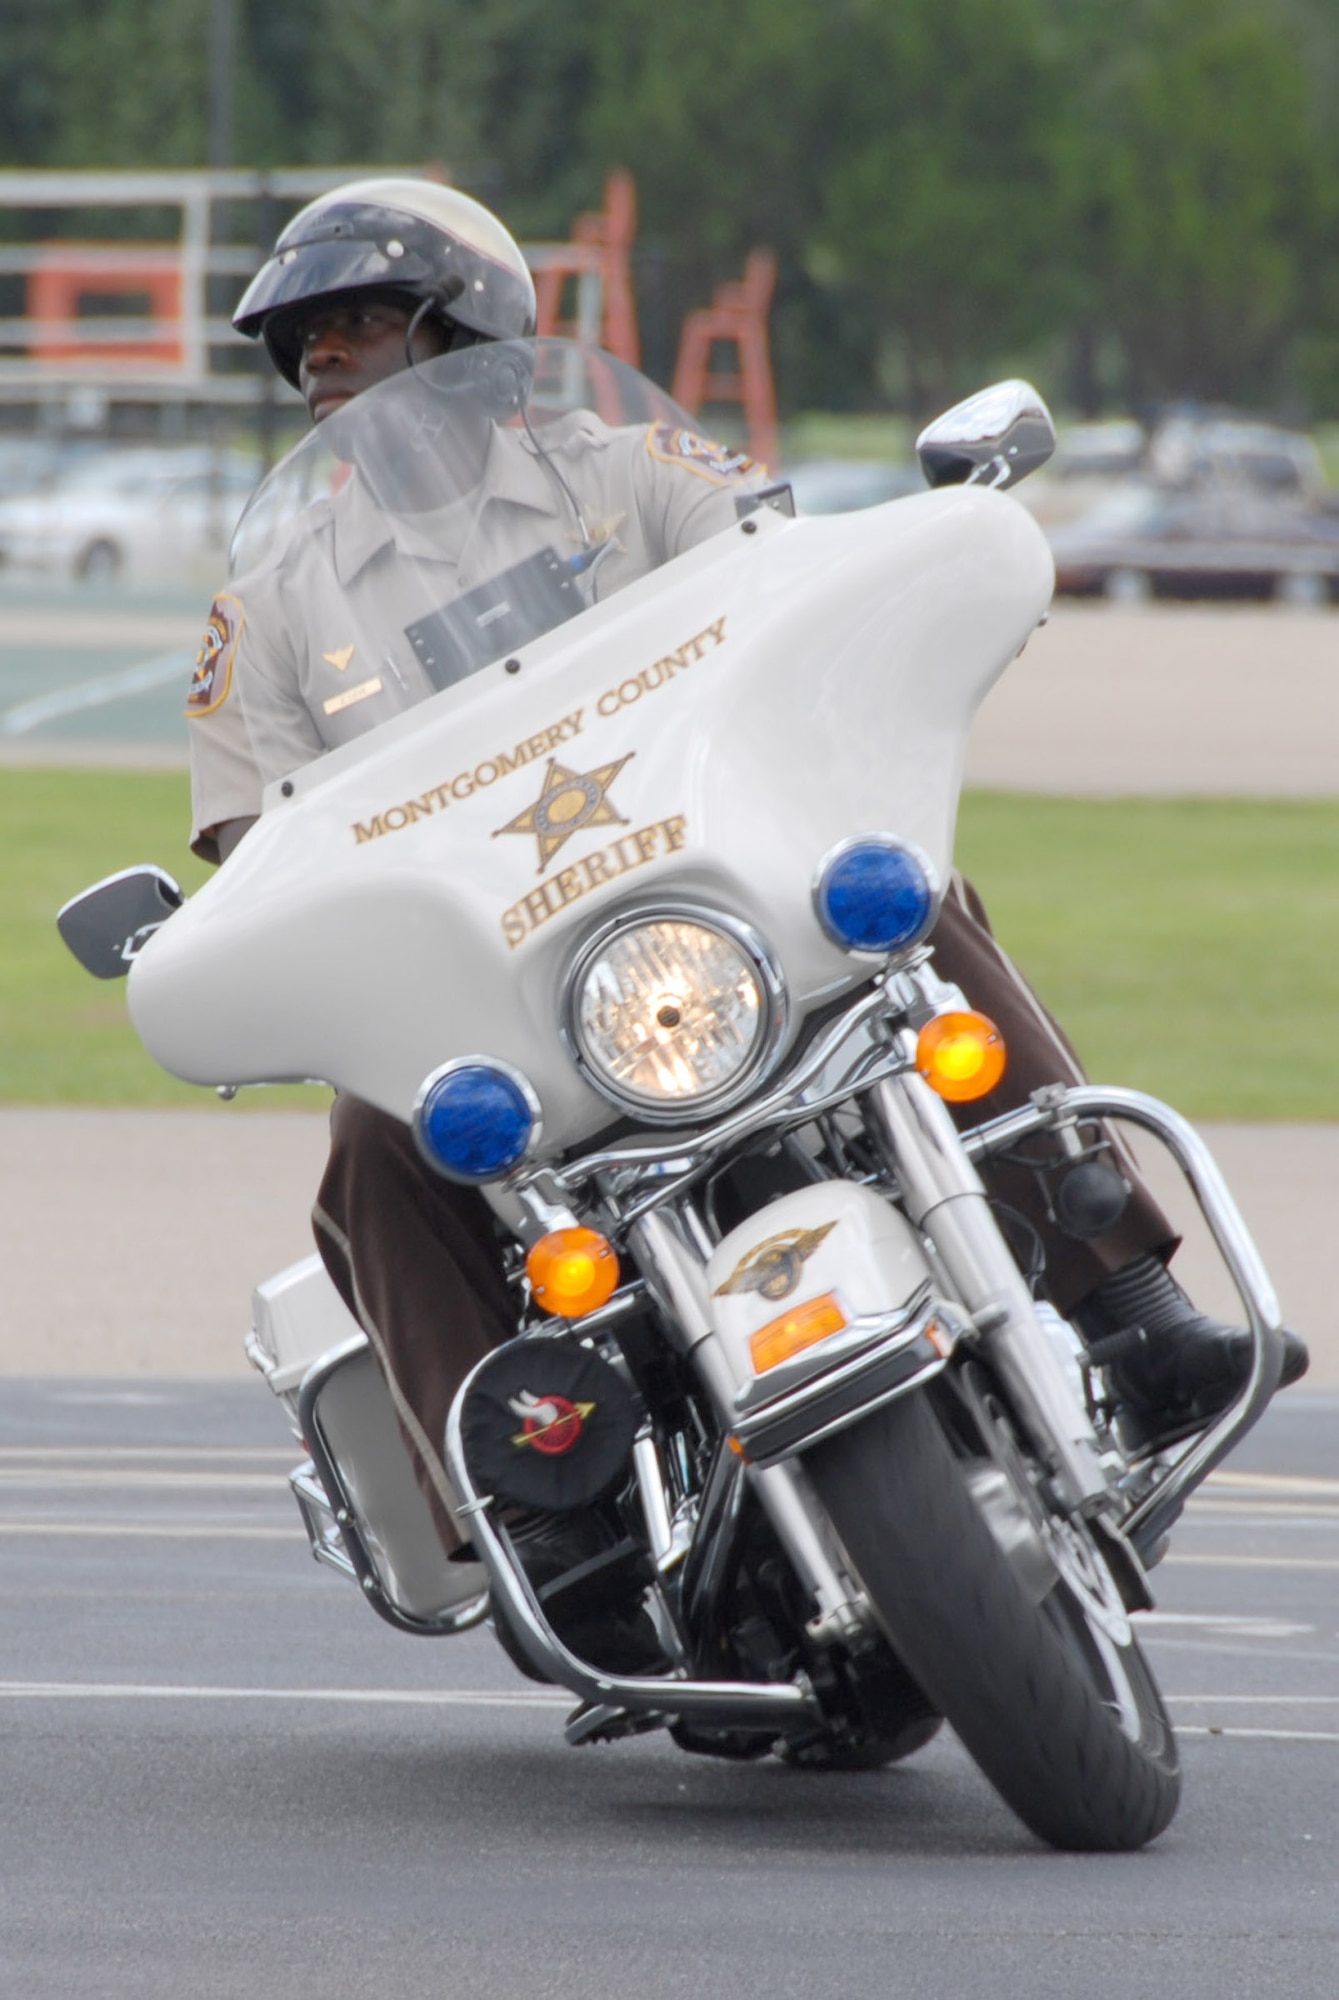 Montgomery County Sheriff's Office deputy Joe Love rides the "Intersection" course that is part of the training MCSO motorcycle officers take. Deputies Love and Gil Robinson set up the course at the rally as a demonstration for those attending the event. (U.S. Air Force photo/Jamie Pitcher)